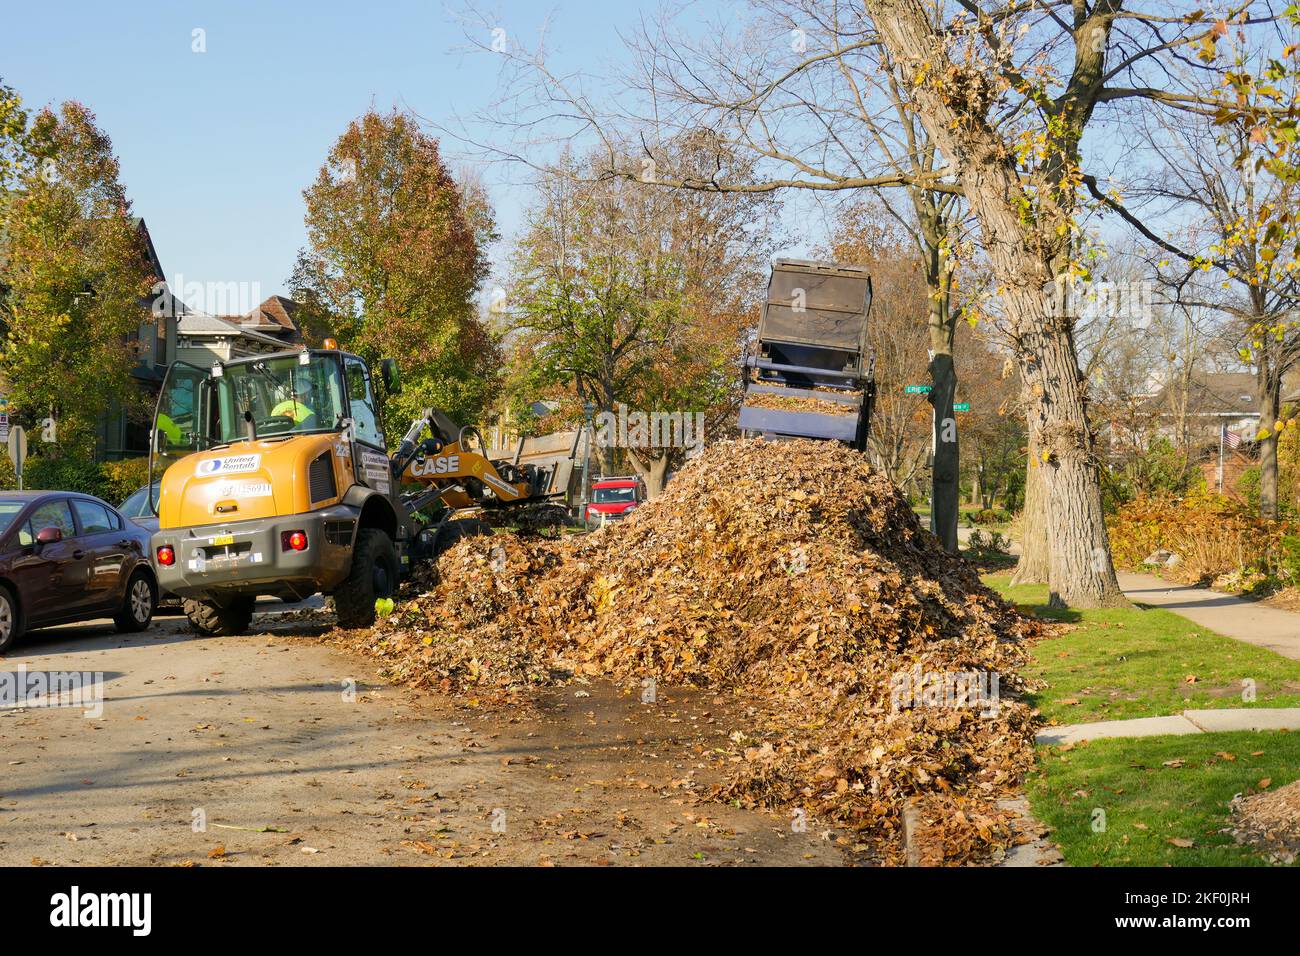 Front-end loader used for autumn leaf pickup. Historic District, Oak Park, Illinois. Leaves will be composted. Stock Photo